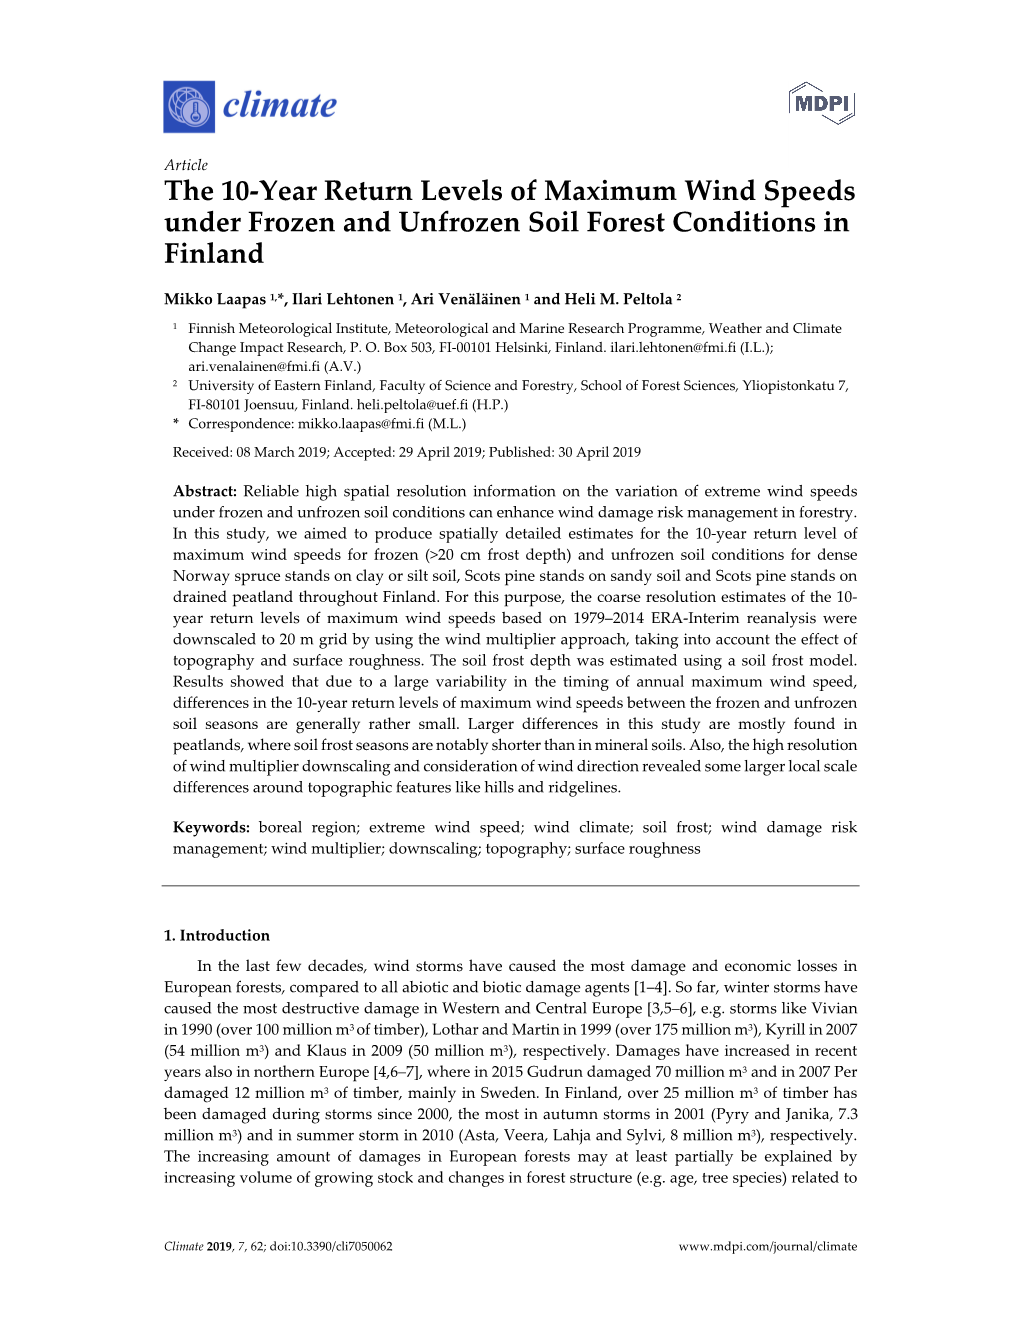 The 10-Year Return Levels of Maximum Wind Speeds Under Frozen and Unfrozen Soil Forest Conditions in Finland